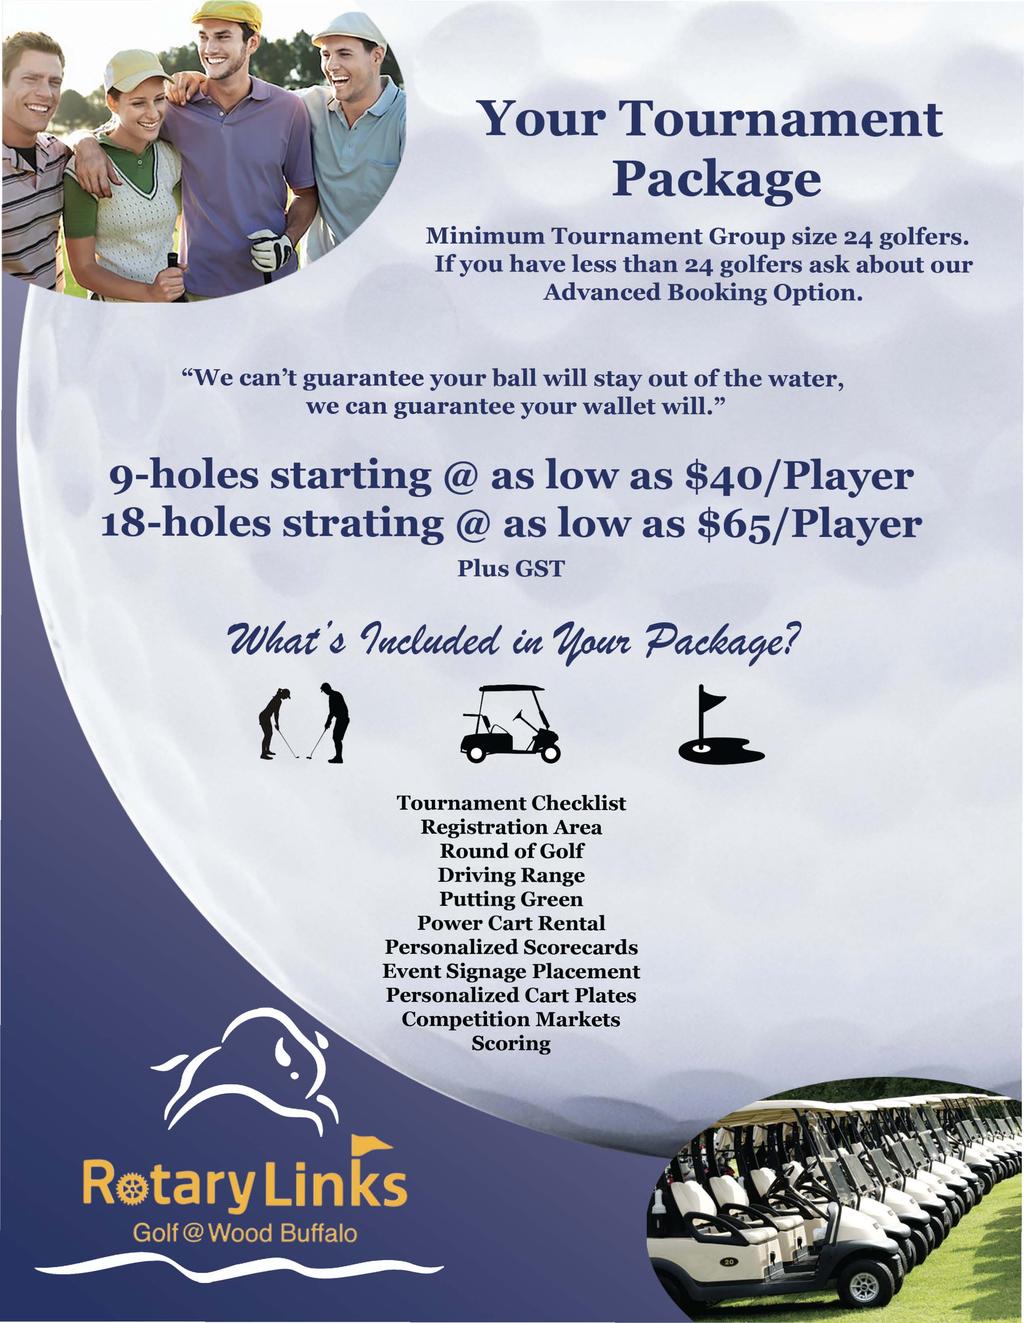 Your Tournament Package Minimum Tournament Group size 24 golfers. If you have less than 24 golfers ask about our Advanced Booking Option.